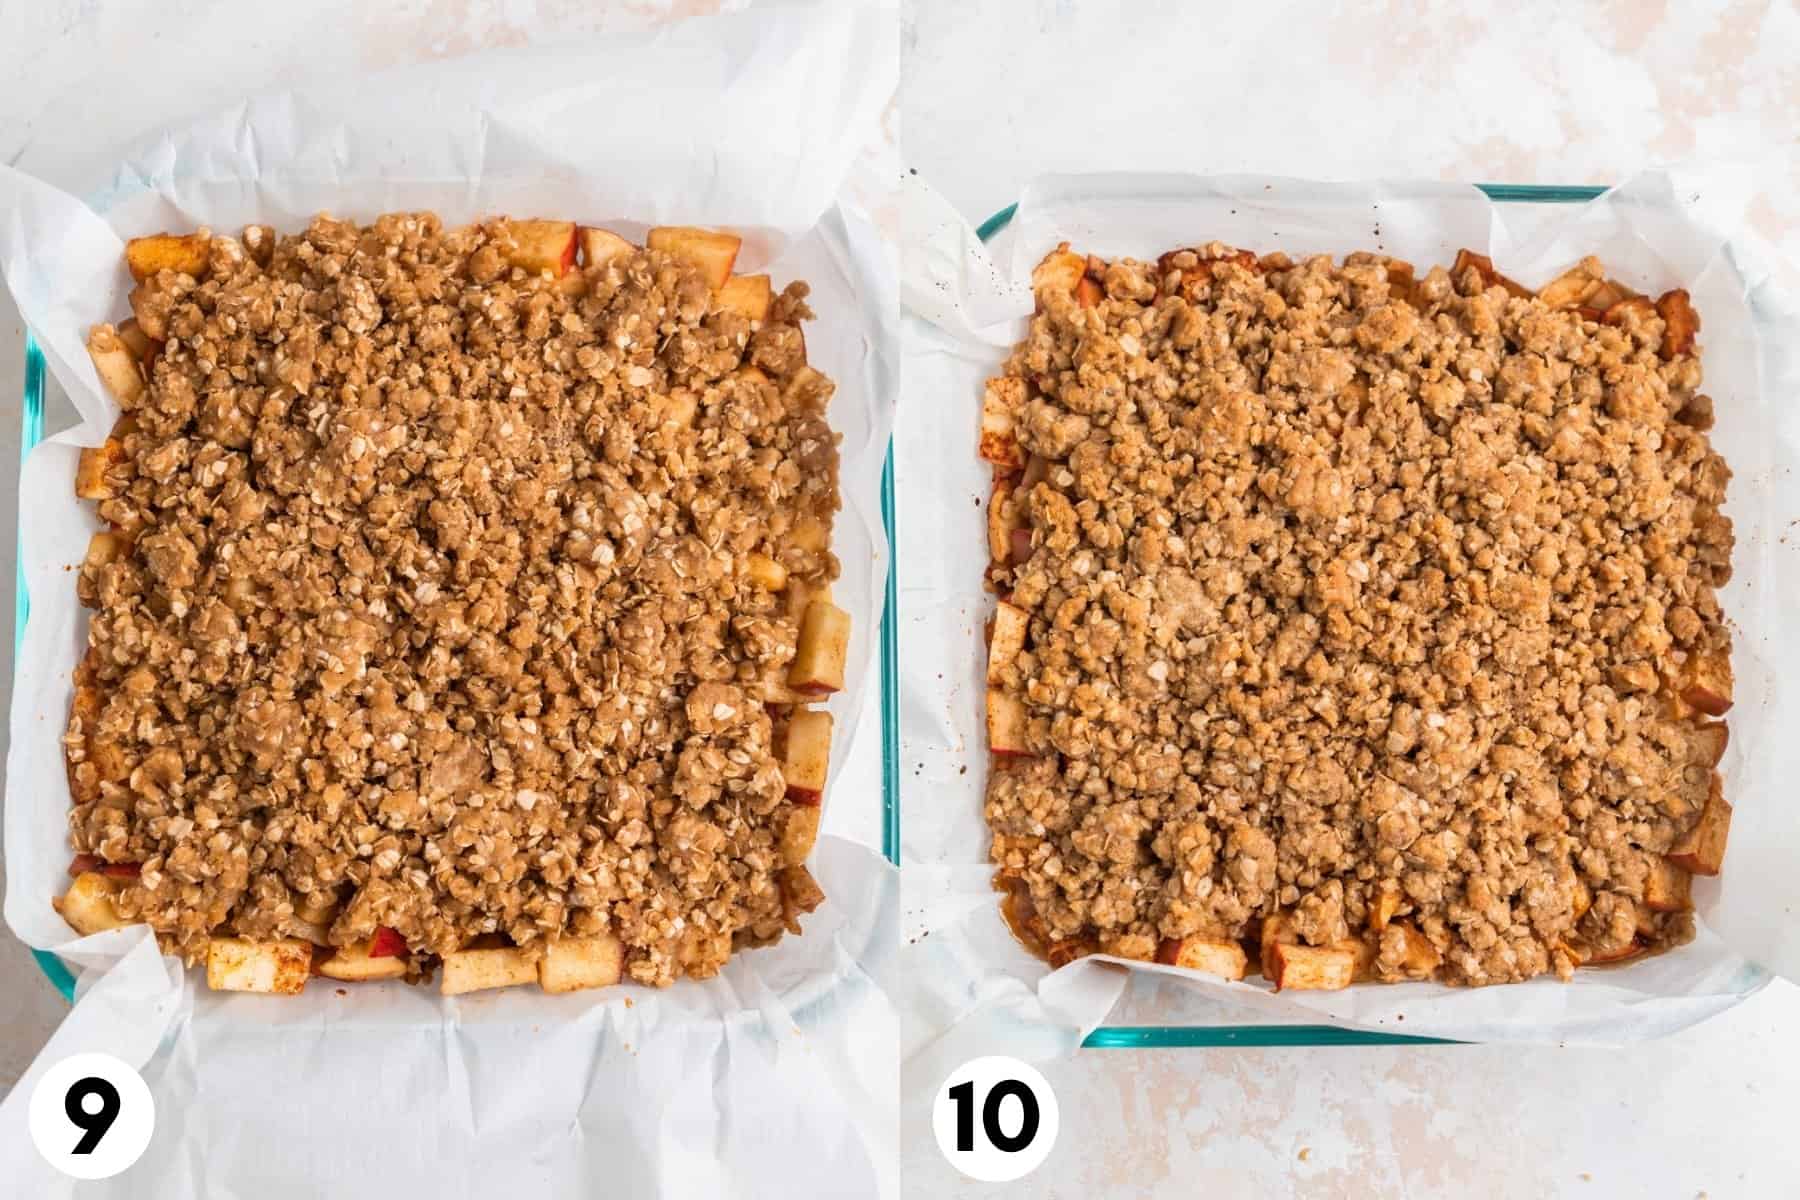 Apple crumble bars before and after baking.